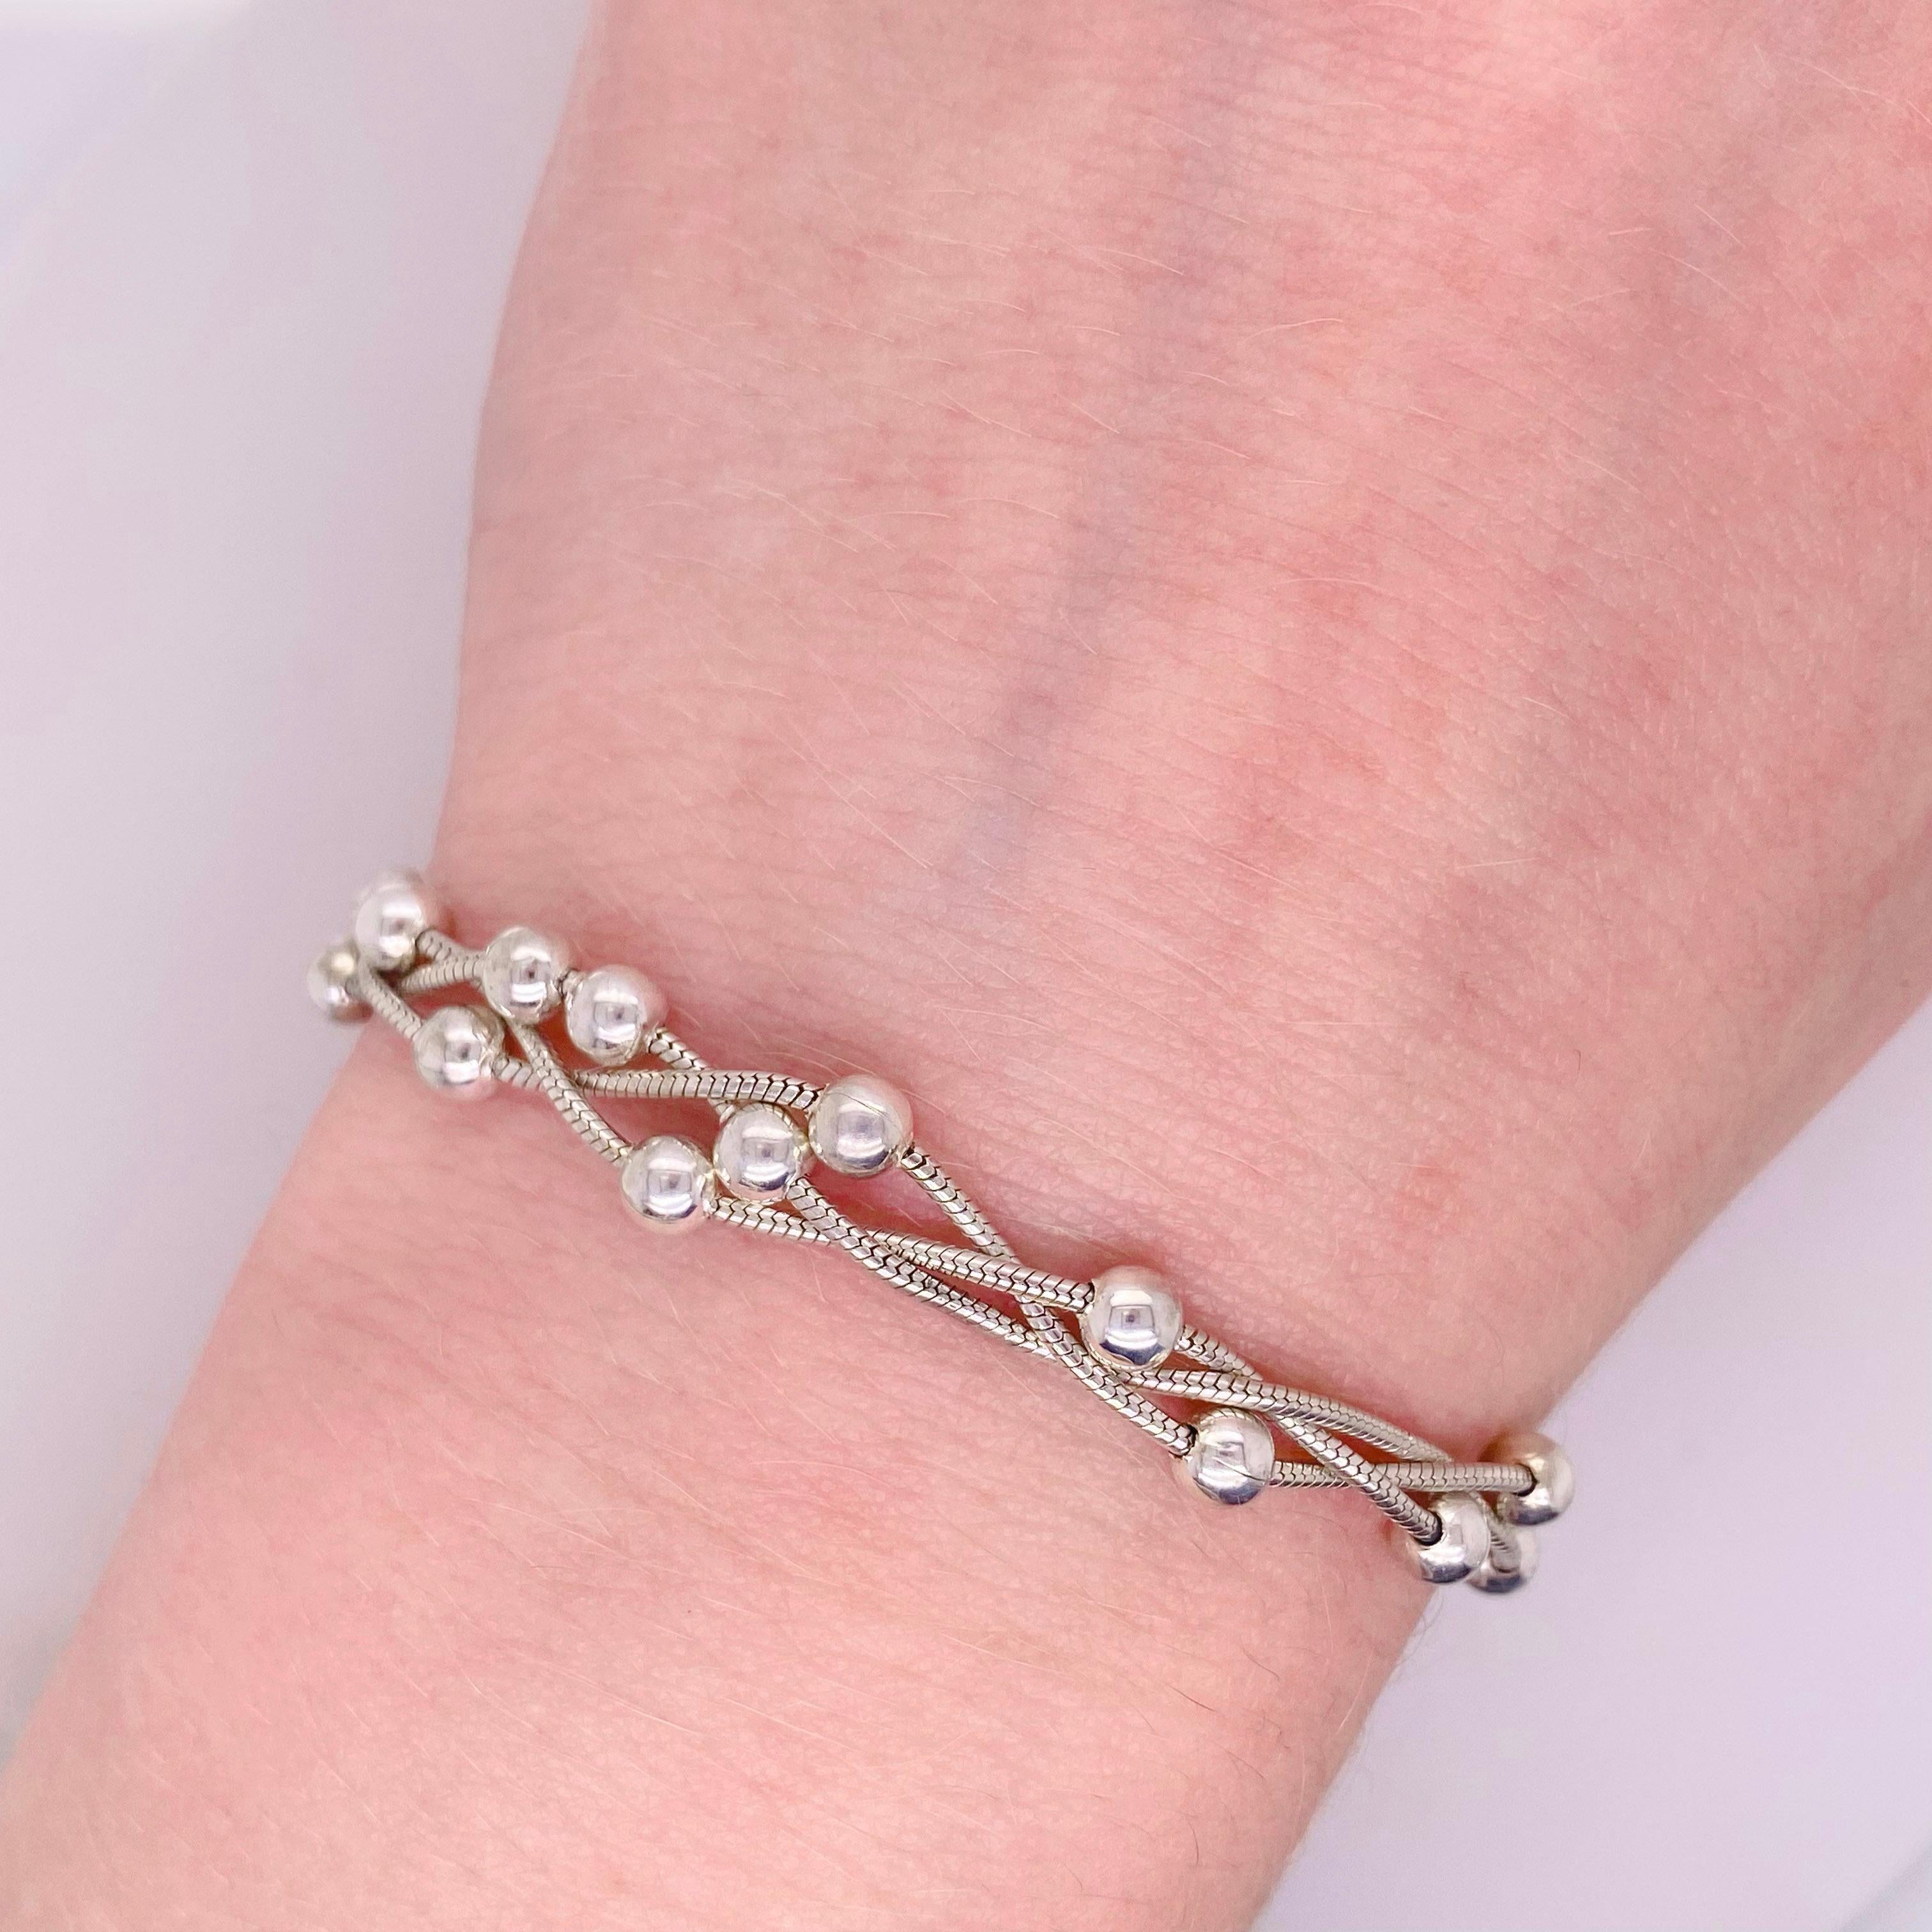 This beaded bracelet in silver is a one of a kind! Made with a nice snake chain with scattered sterling beads. So gorgeous alone or stacked with other bracelets. There is one one! The details for this gorgeous bracelet are listed below:
Bracelet